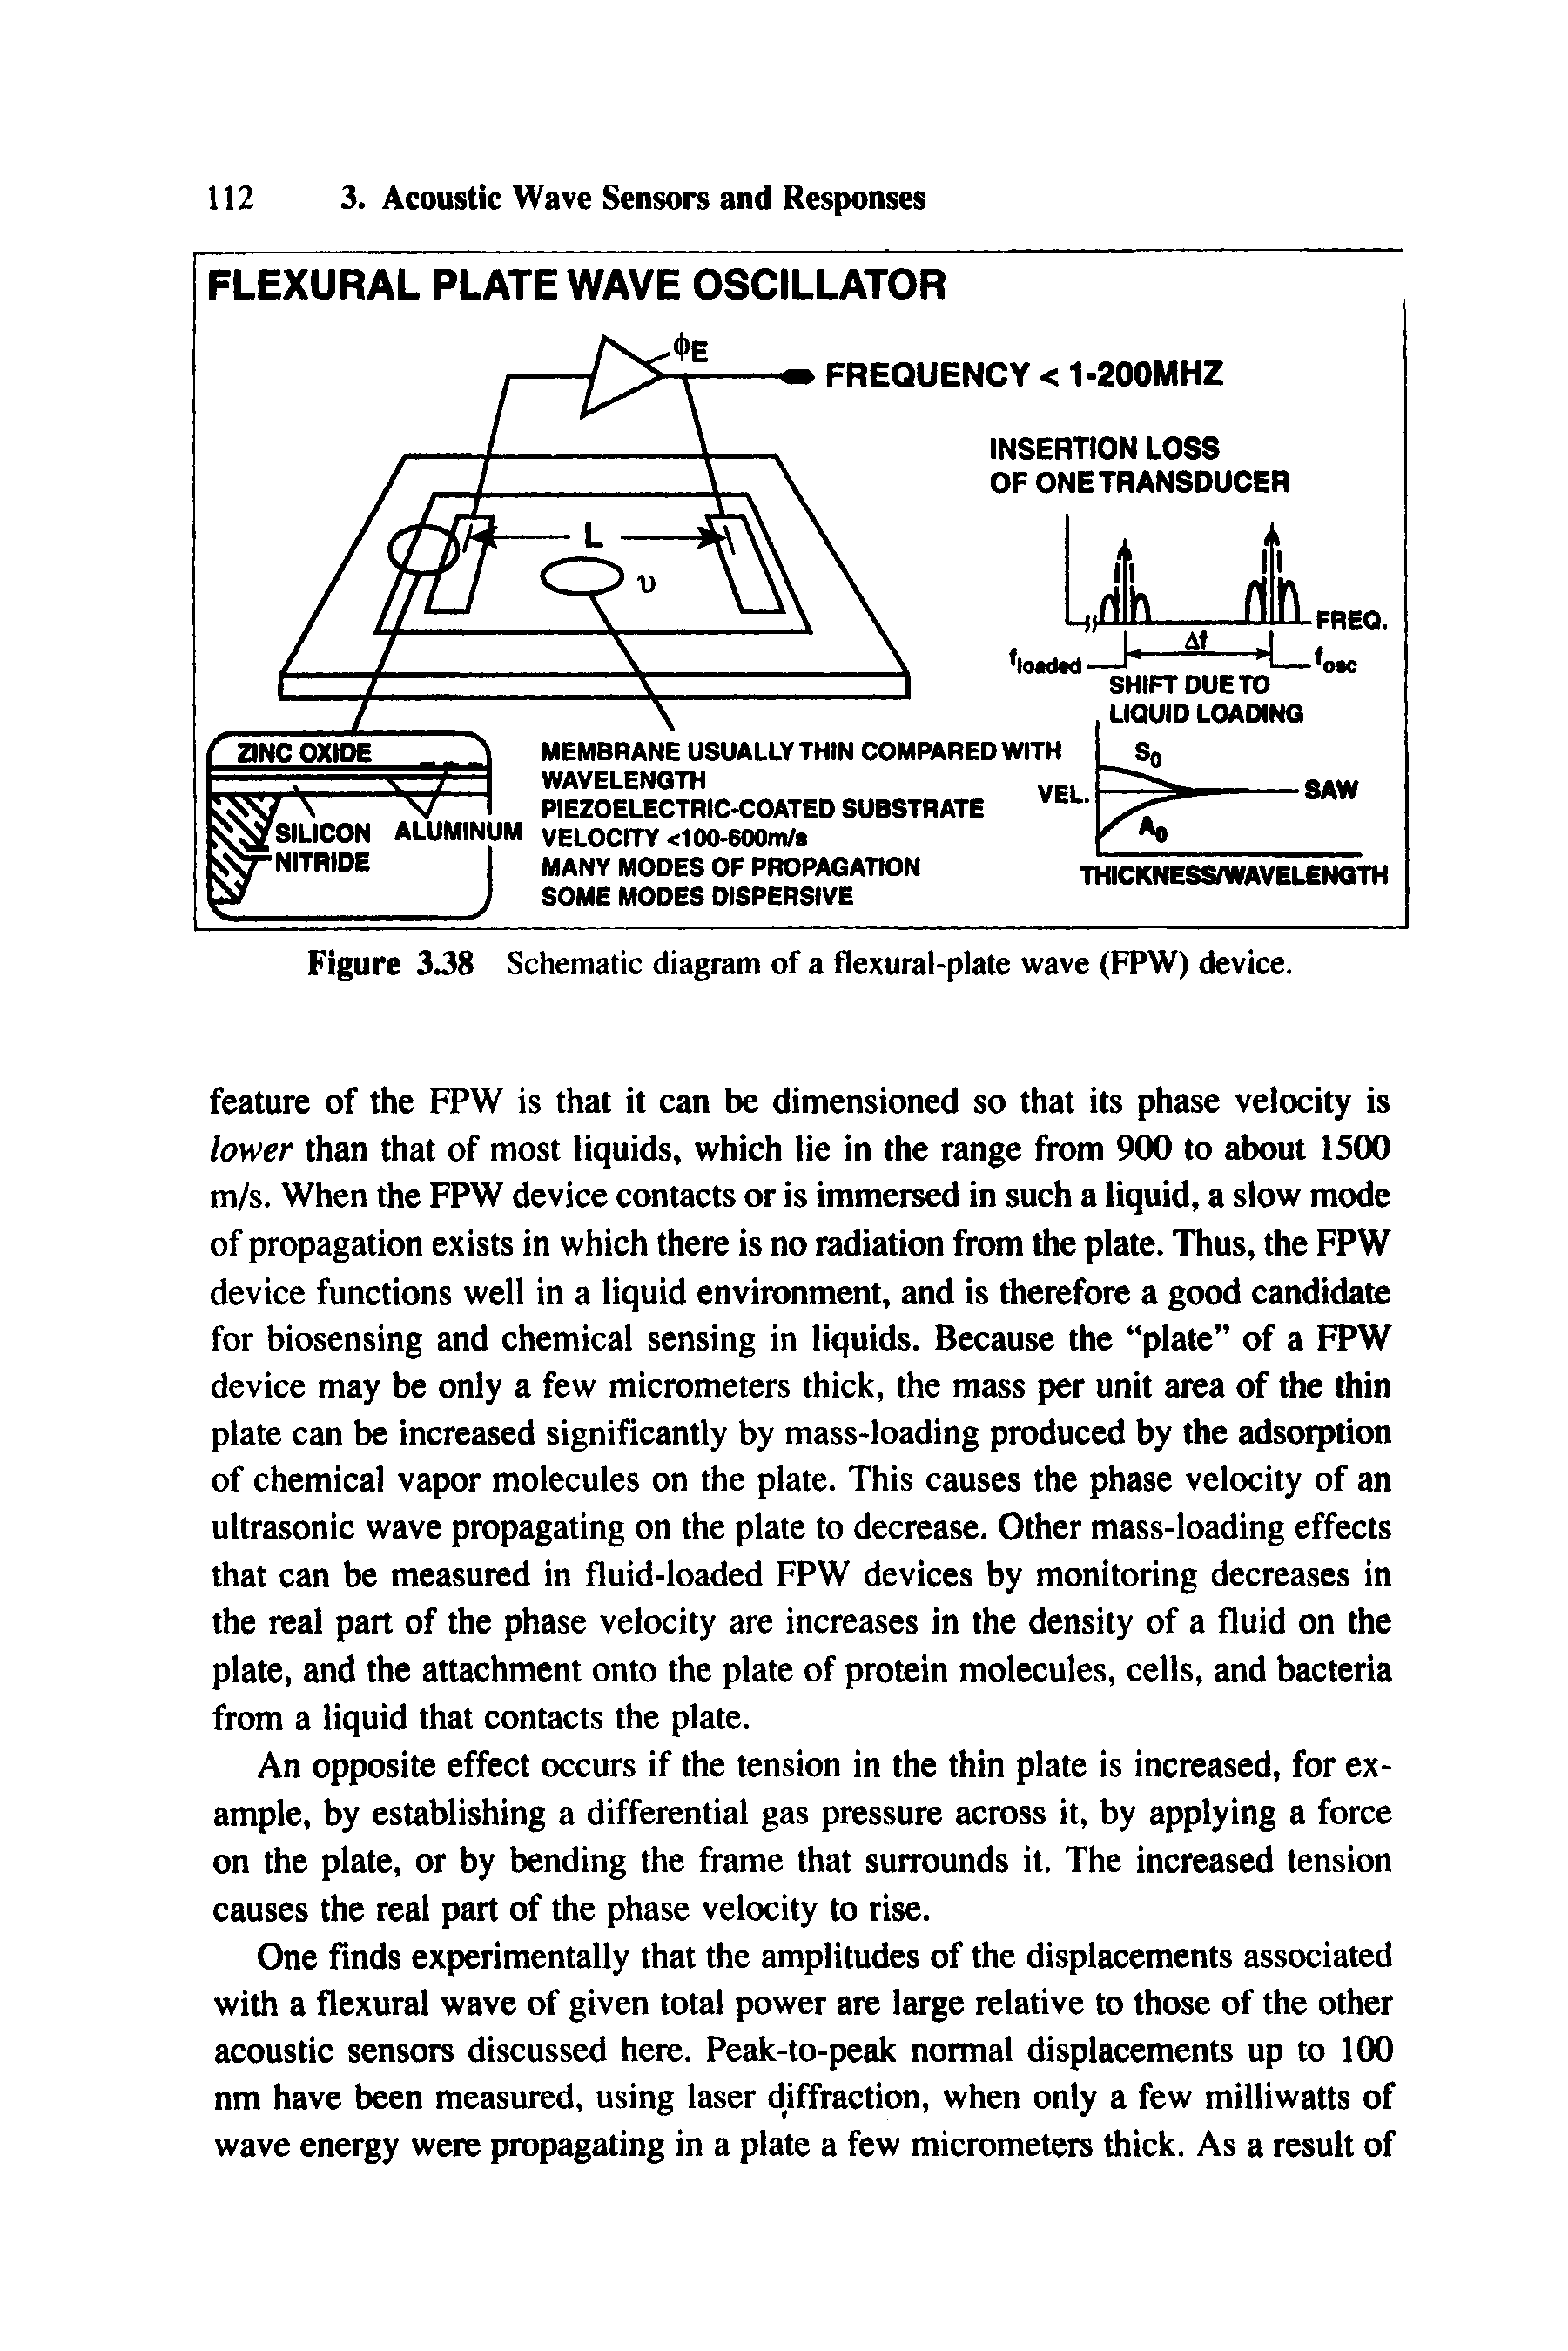 Figure 3.38 Schematic diagram of a flexural-plate wave (FPW) device.